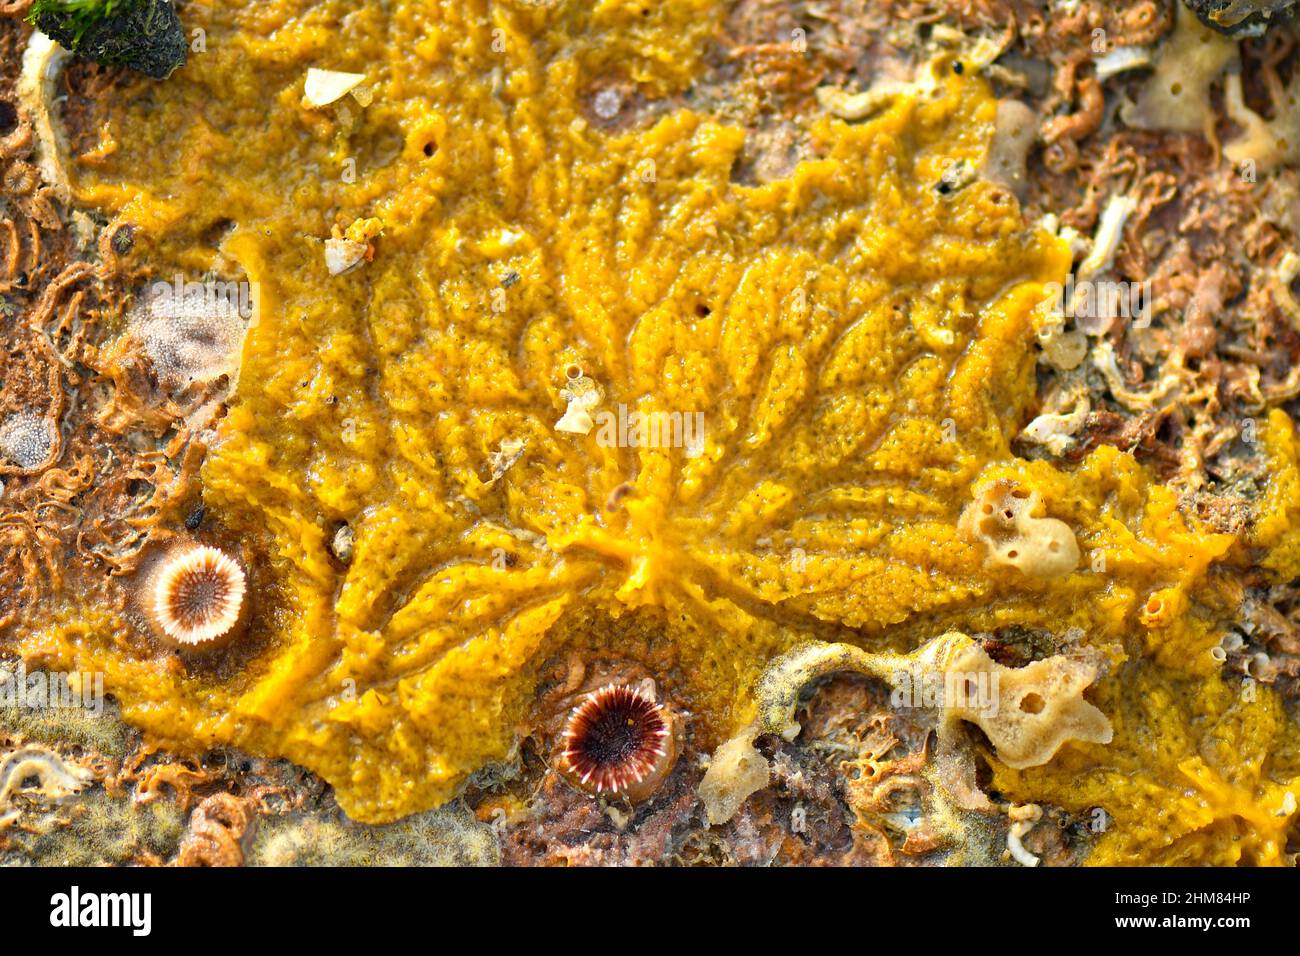 Sea creatures form patterns on seabeds. Stock Photo